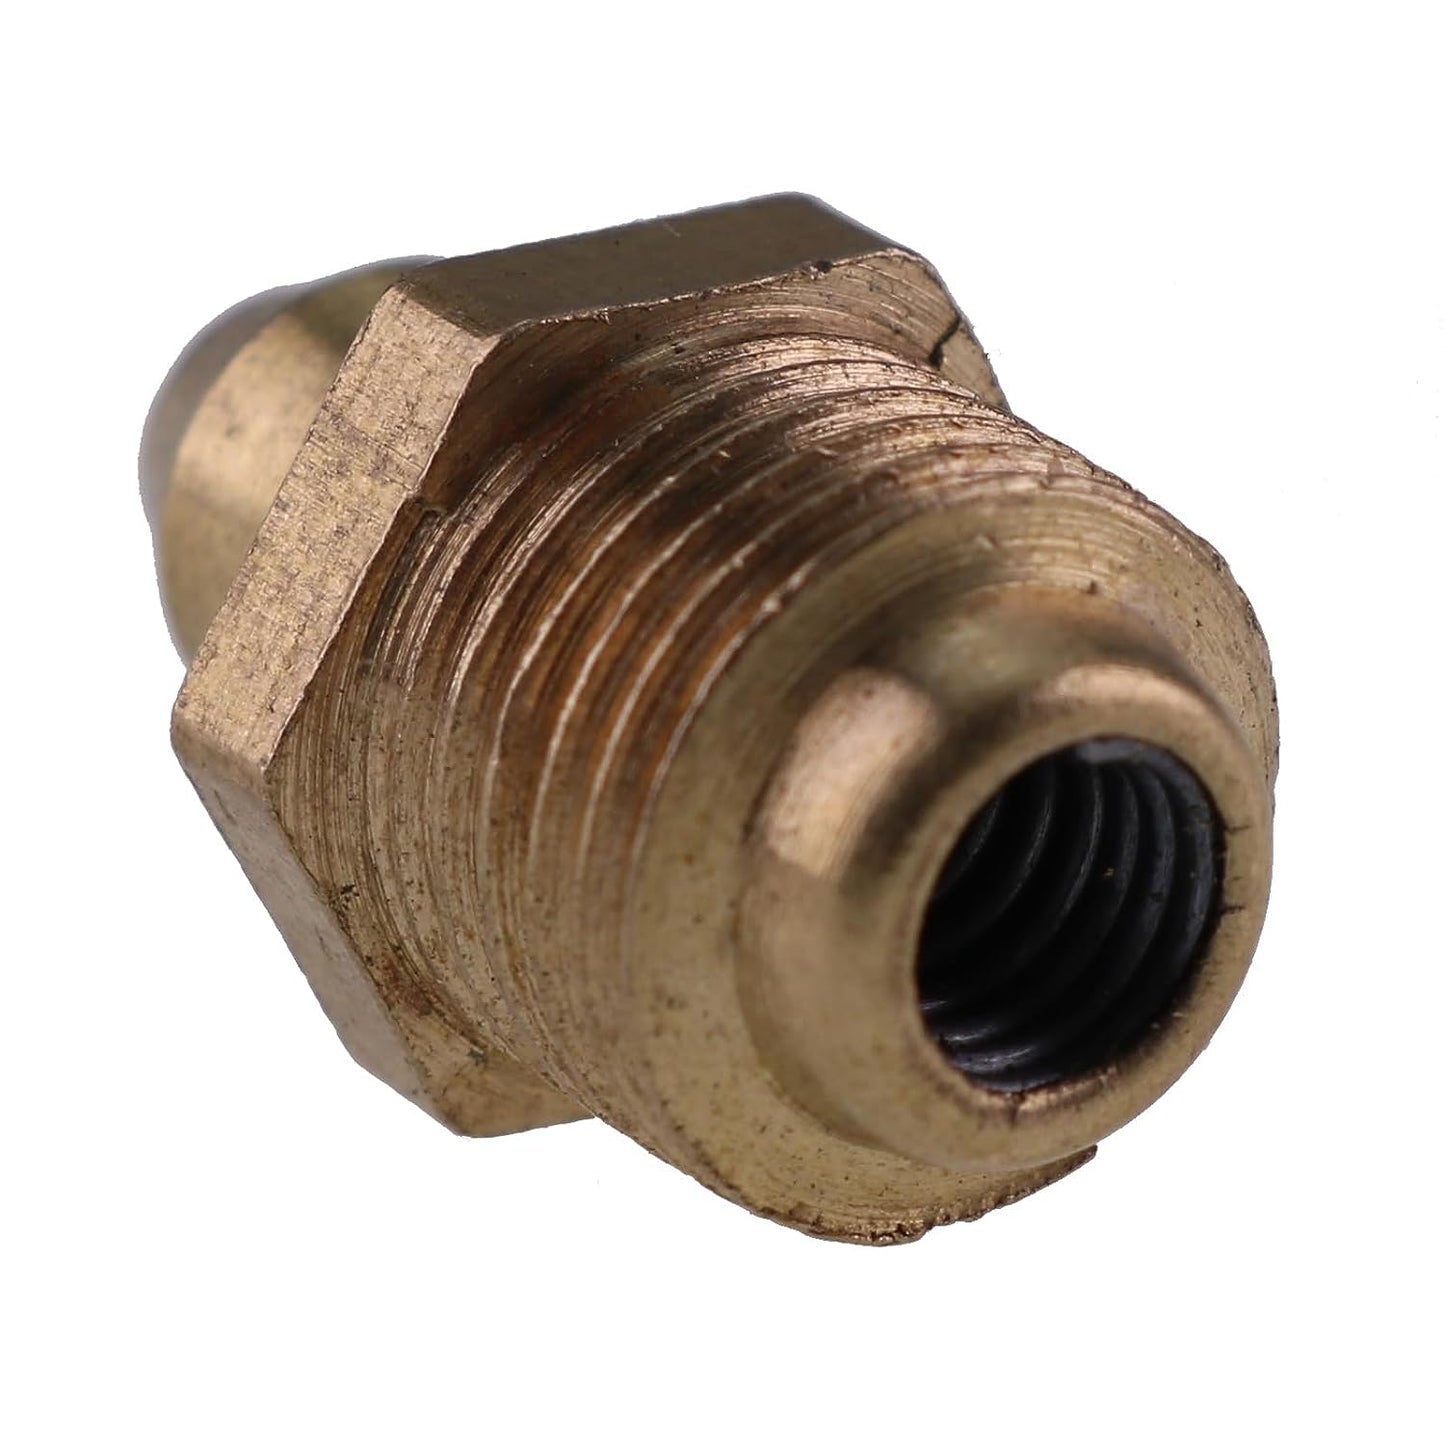 743332 Grease Serk Fitting Compatible With Bobcat T140 T180 T190 T200 A220 MT52 MT85